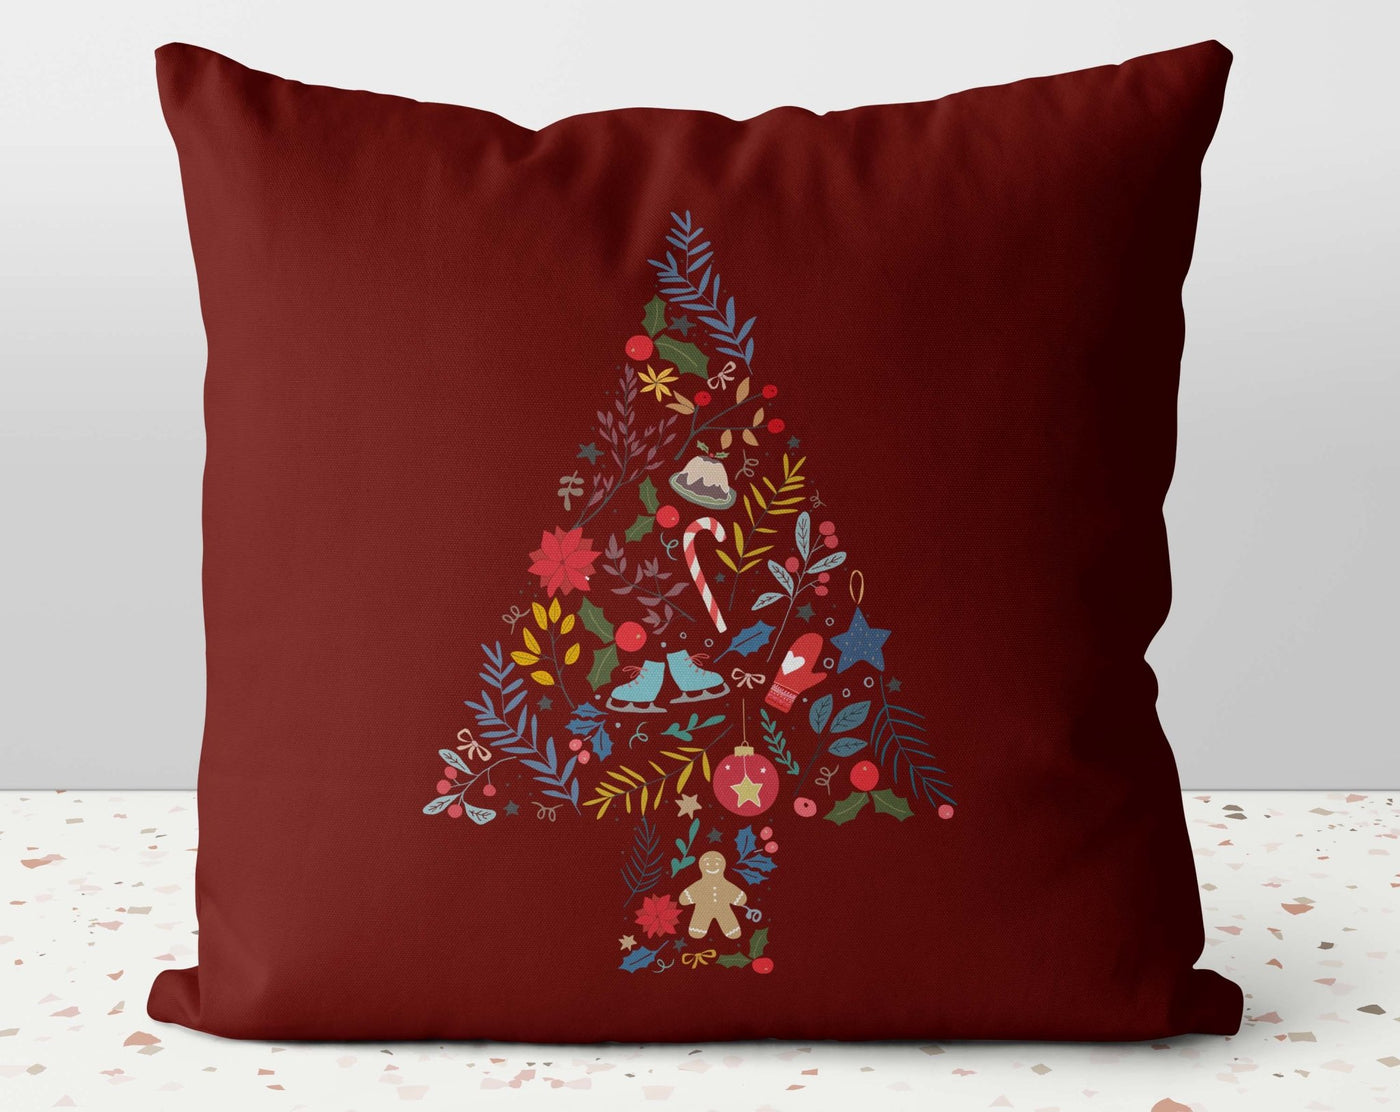 Traditional Christmas Tree Cluster Collage Pillow Throw Cover with Insert - Cush Potato Pillows